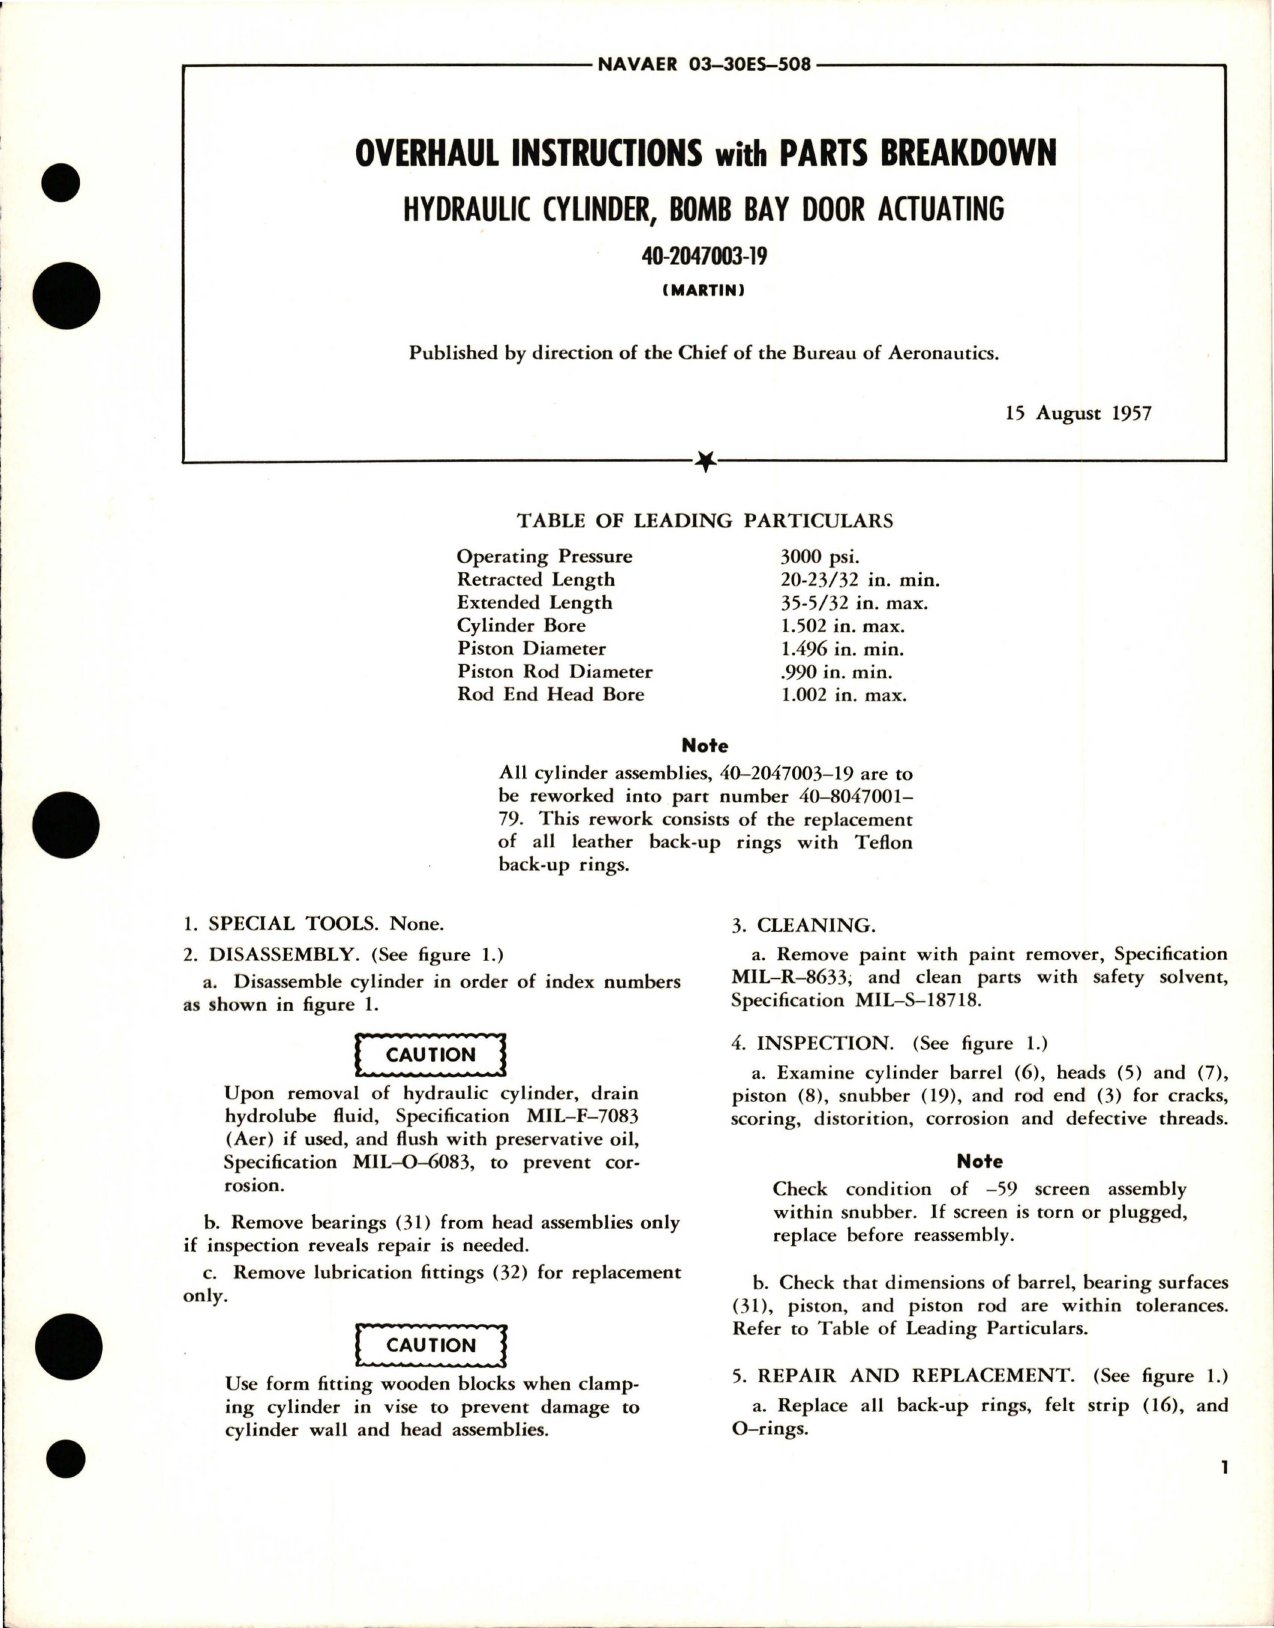 Sample page 1 from AirCorps Library document: Overhaul Instructions with Parts Breakdown for Bomb Bay Door Actuating Hydraulic Cylinder - 40-2047003-19